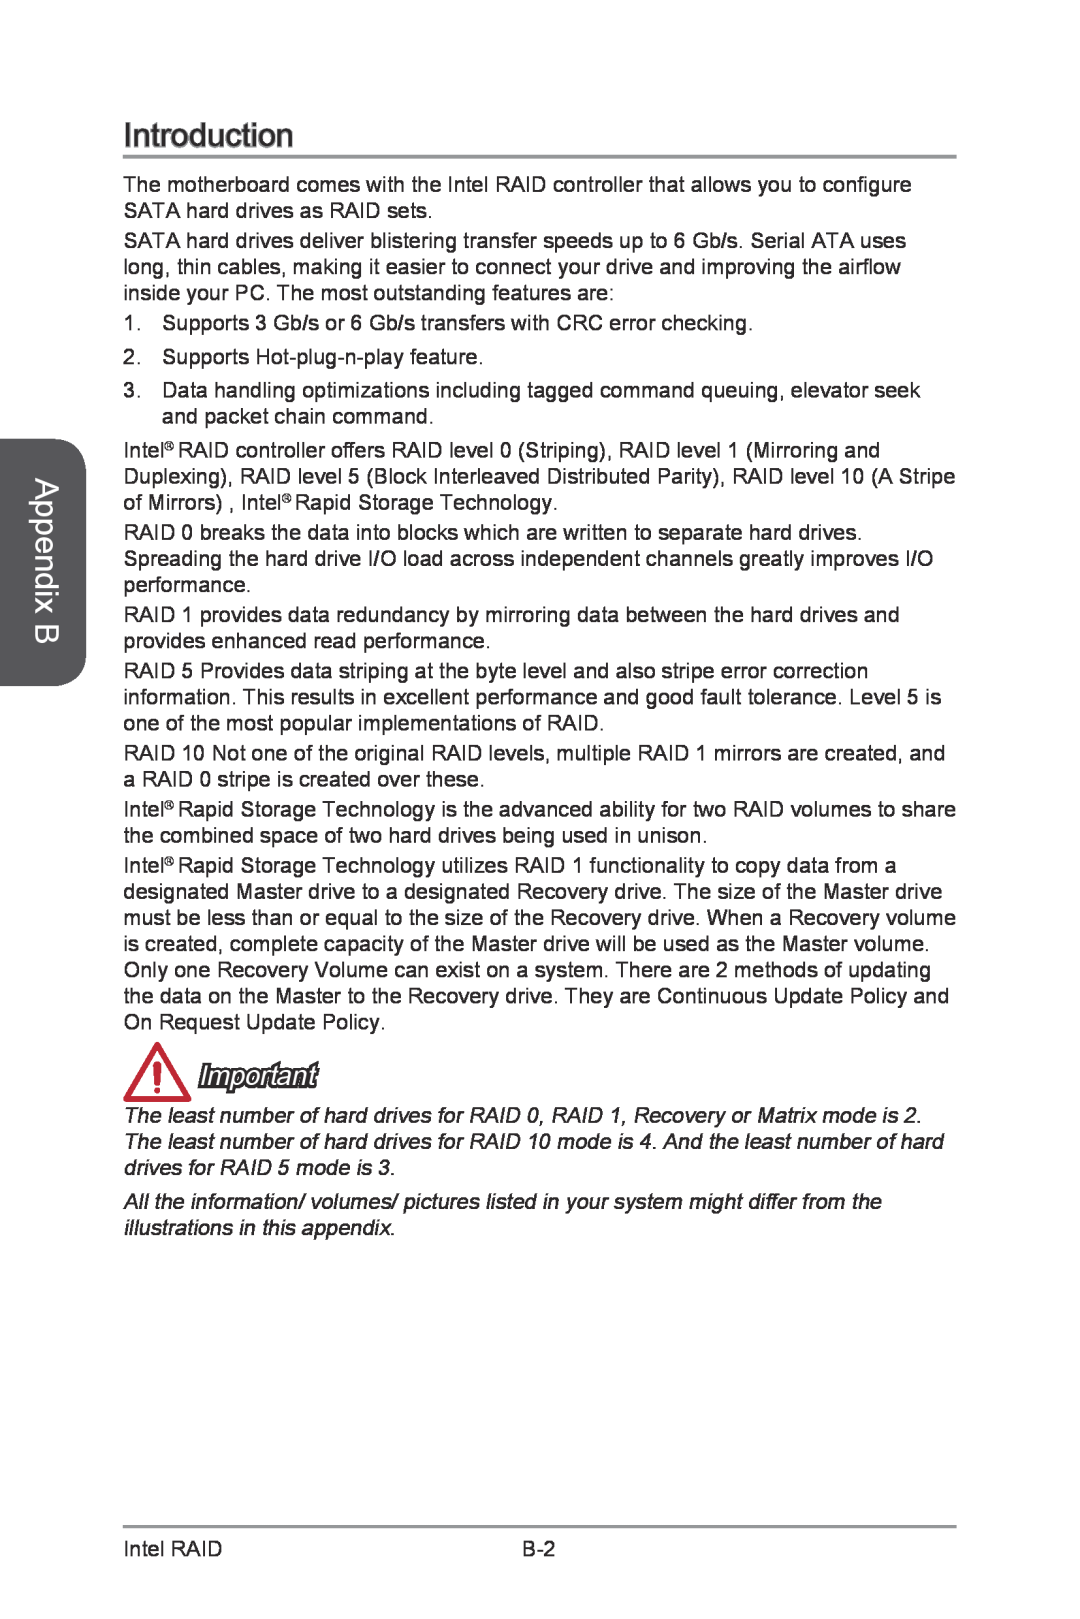 MSI Z87-XPOWER manual Appendix B, Introduction 